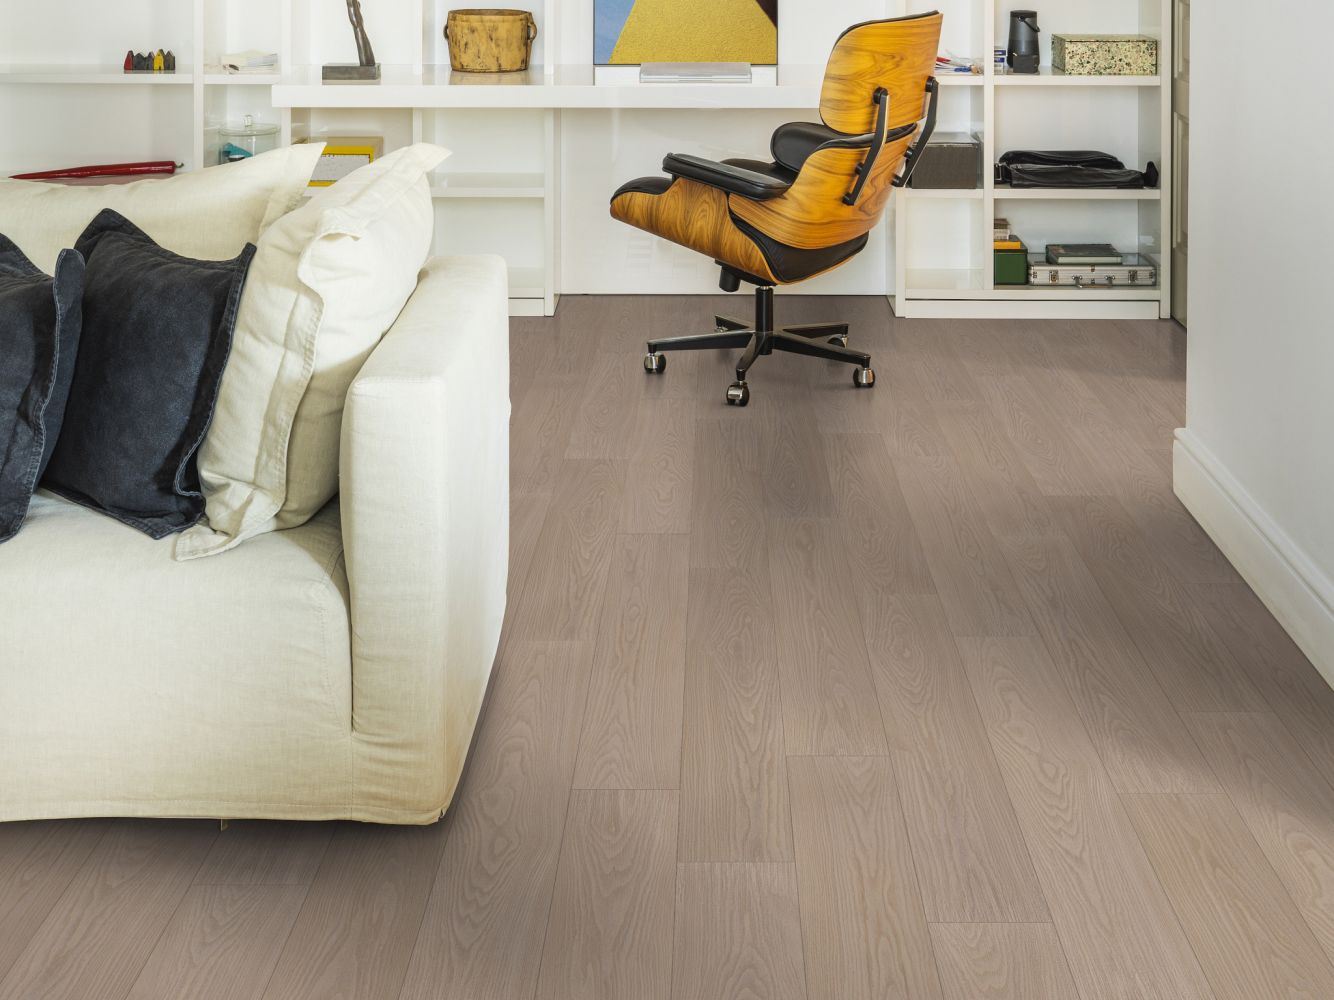 Shaw Floors Resilient Residential Distinction Plus Toasted Sienna 07322_2045V